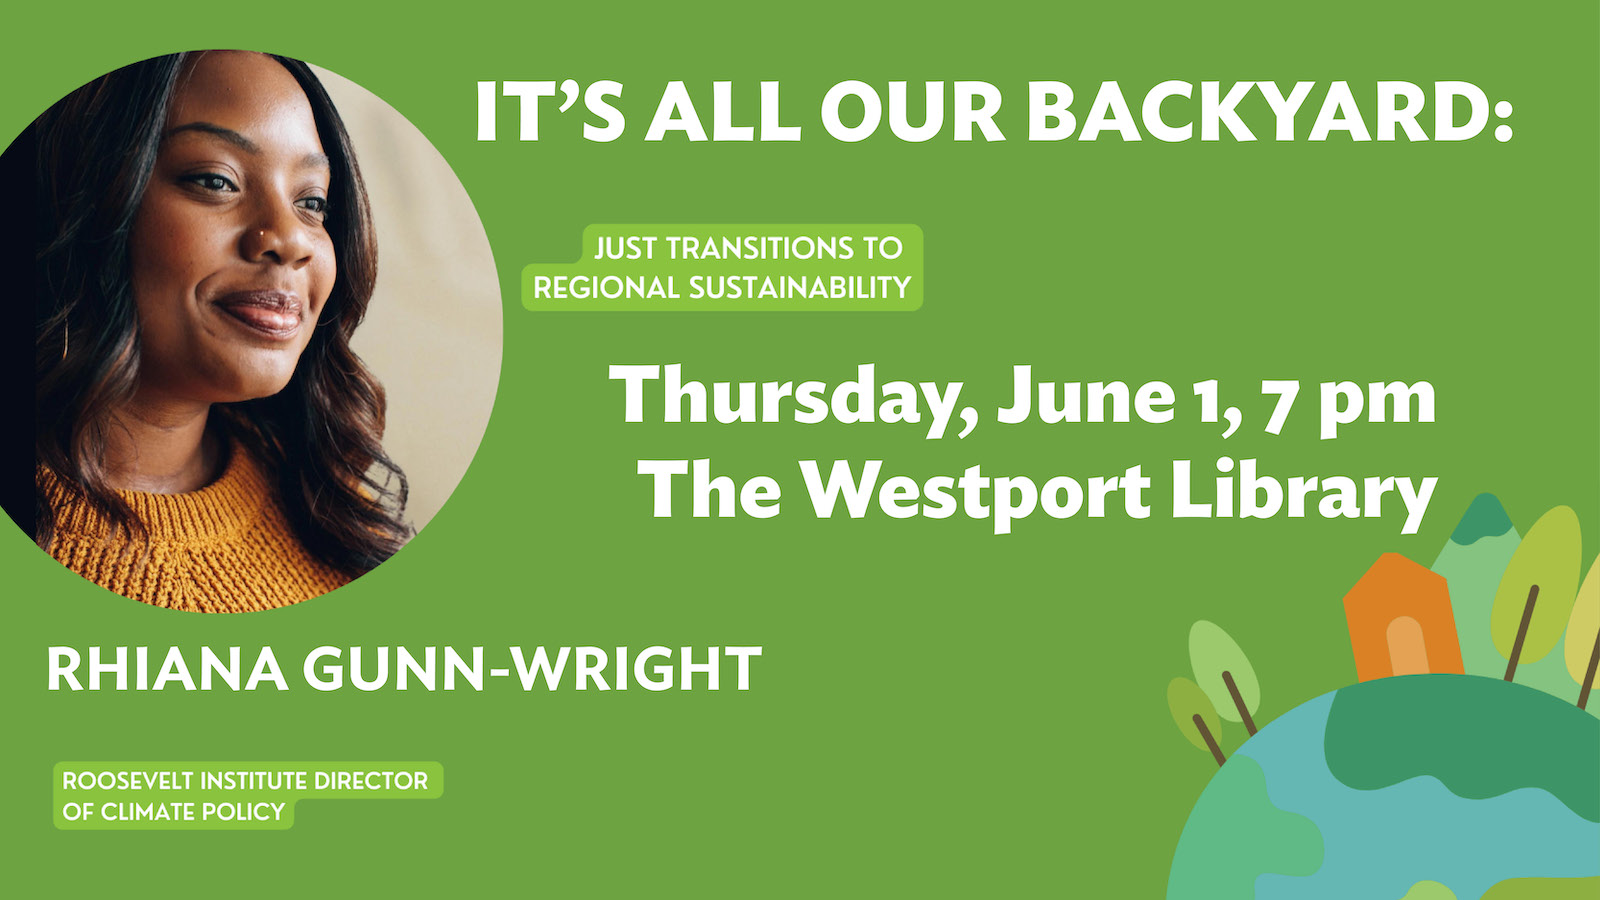 Graphic for event: It’s All Our Backyard: Just Transitions to Regional Sustainability, with Rhiana Gunn-Wright